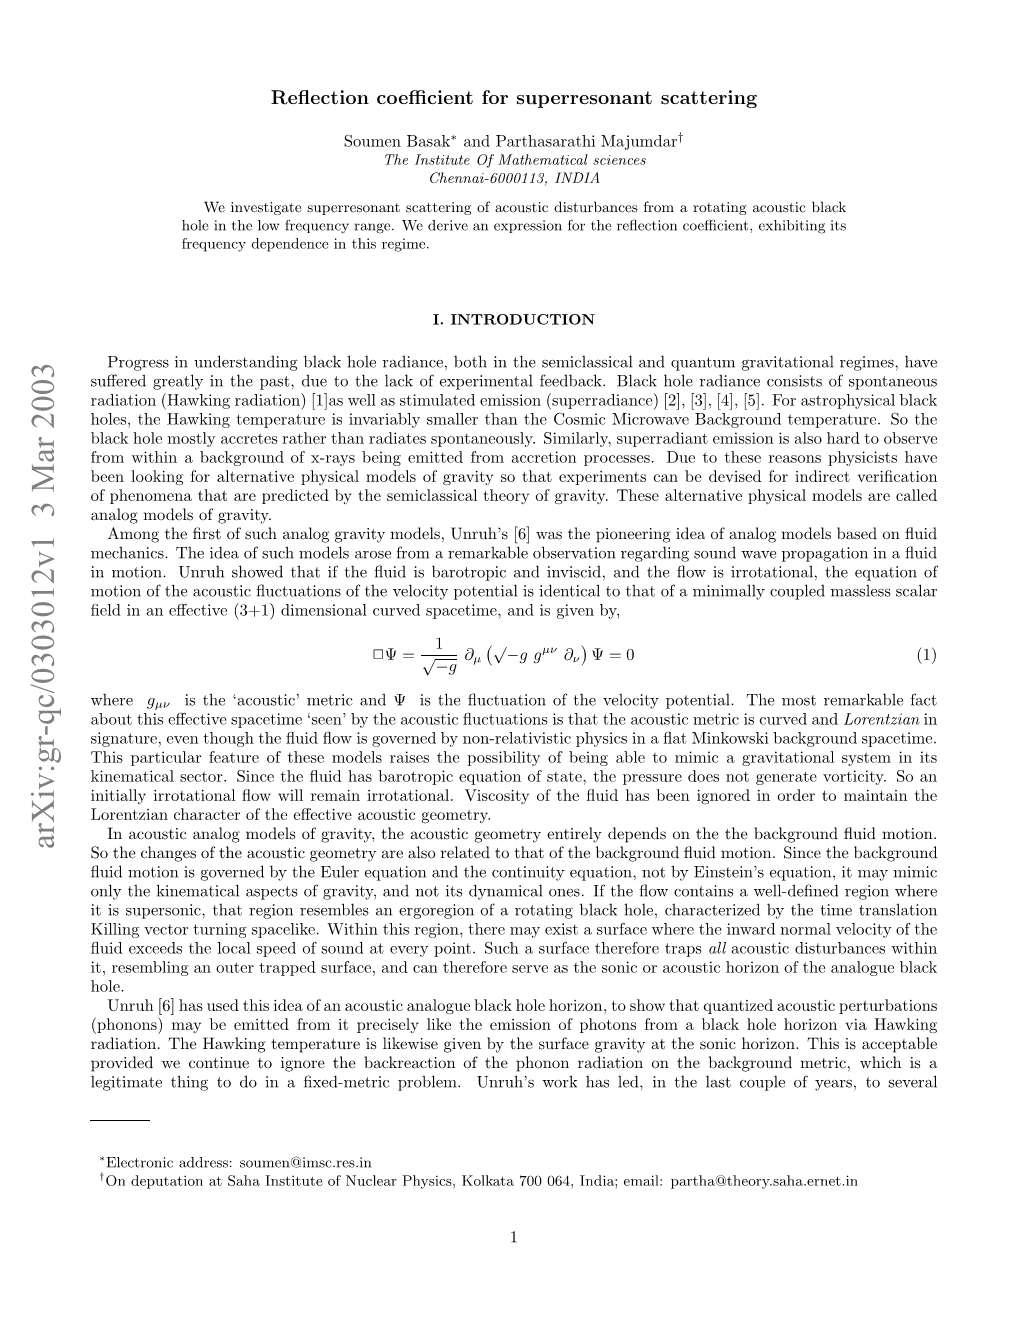 Reflection Coefficient for Superresonant Scattering